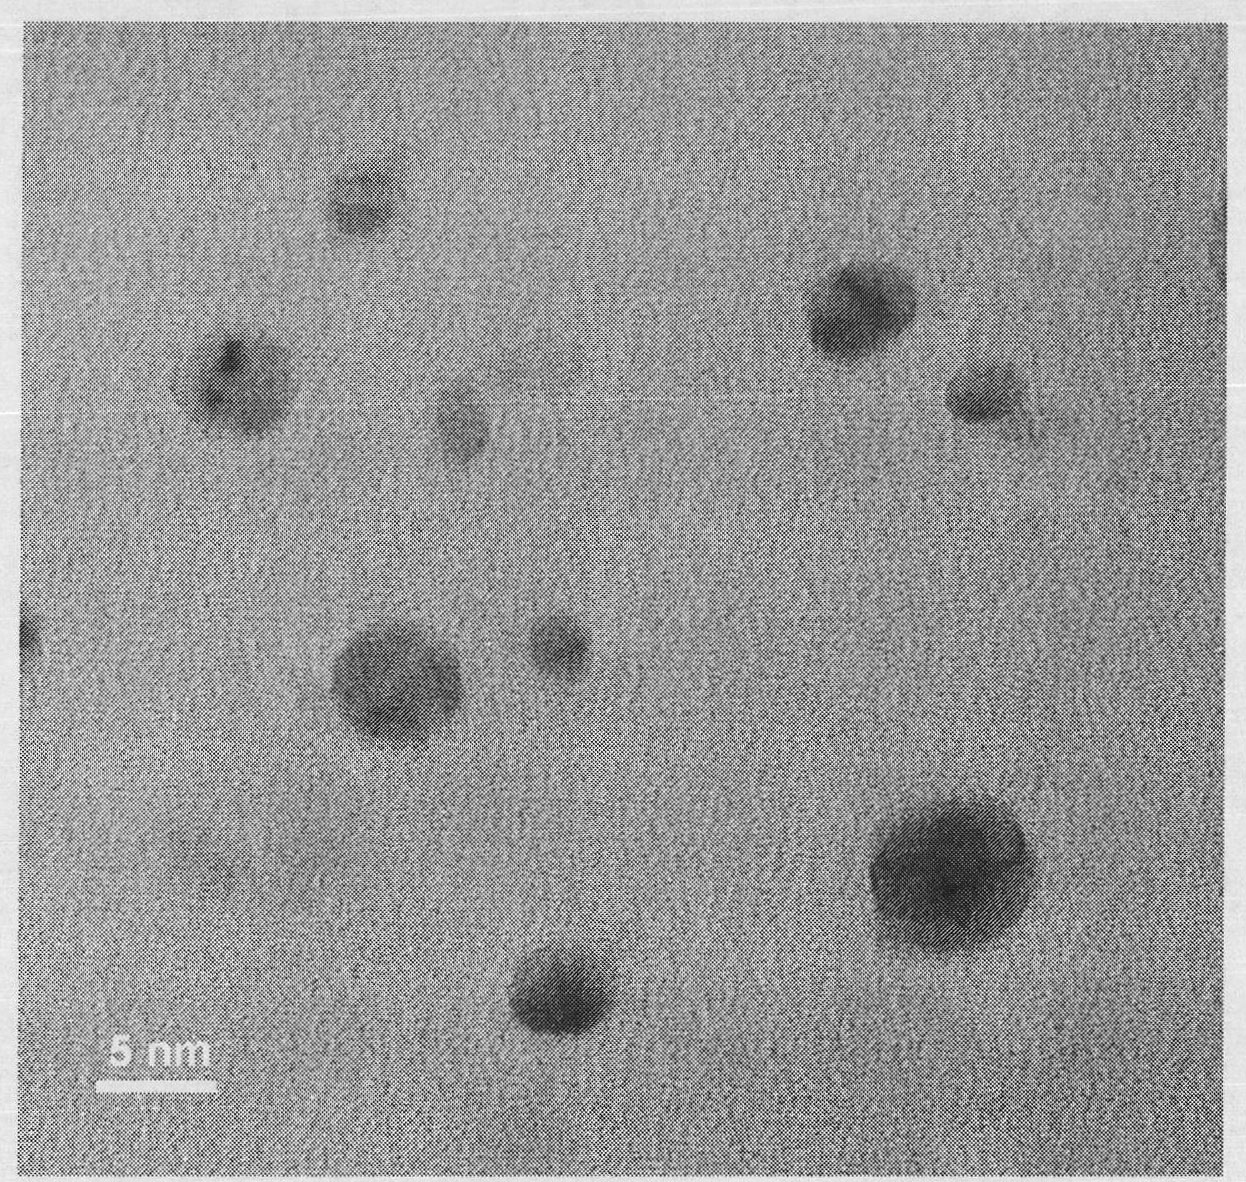 Preparation method of water-soluble silver halide nanoparticle